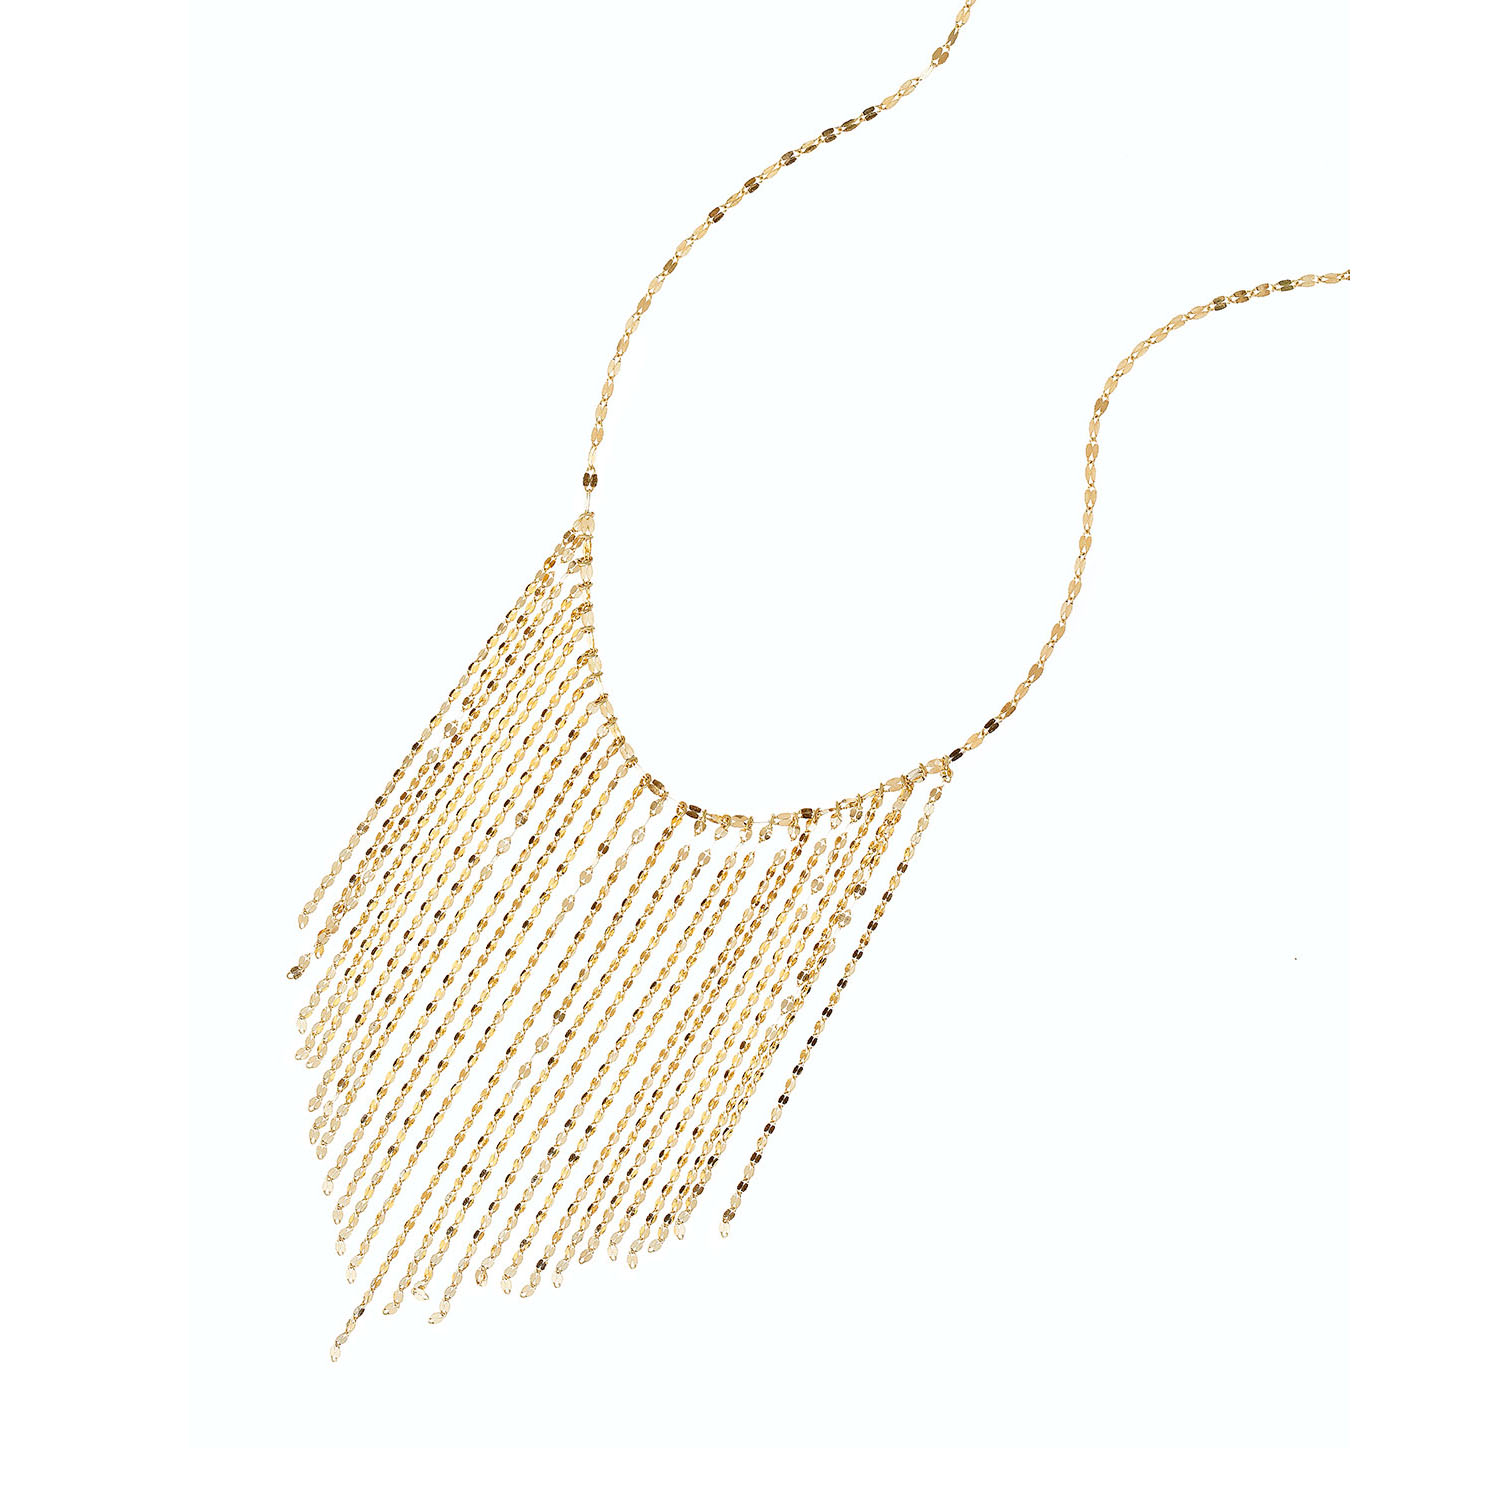 Wholesale Custom 14k Long Fringe Necklace with OEM/ODM Jewelry gold or gold plated silver sterling finish